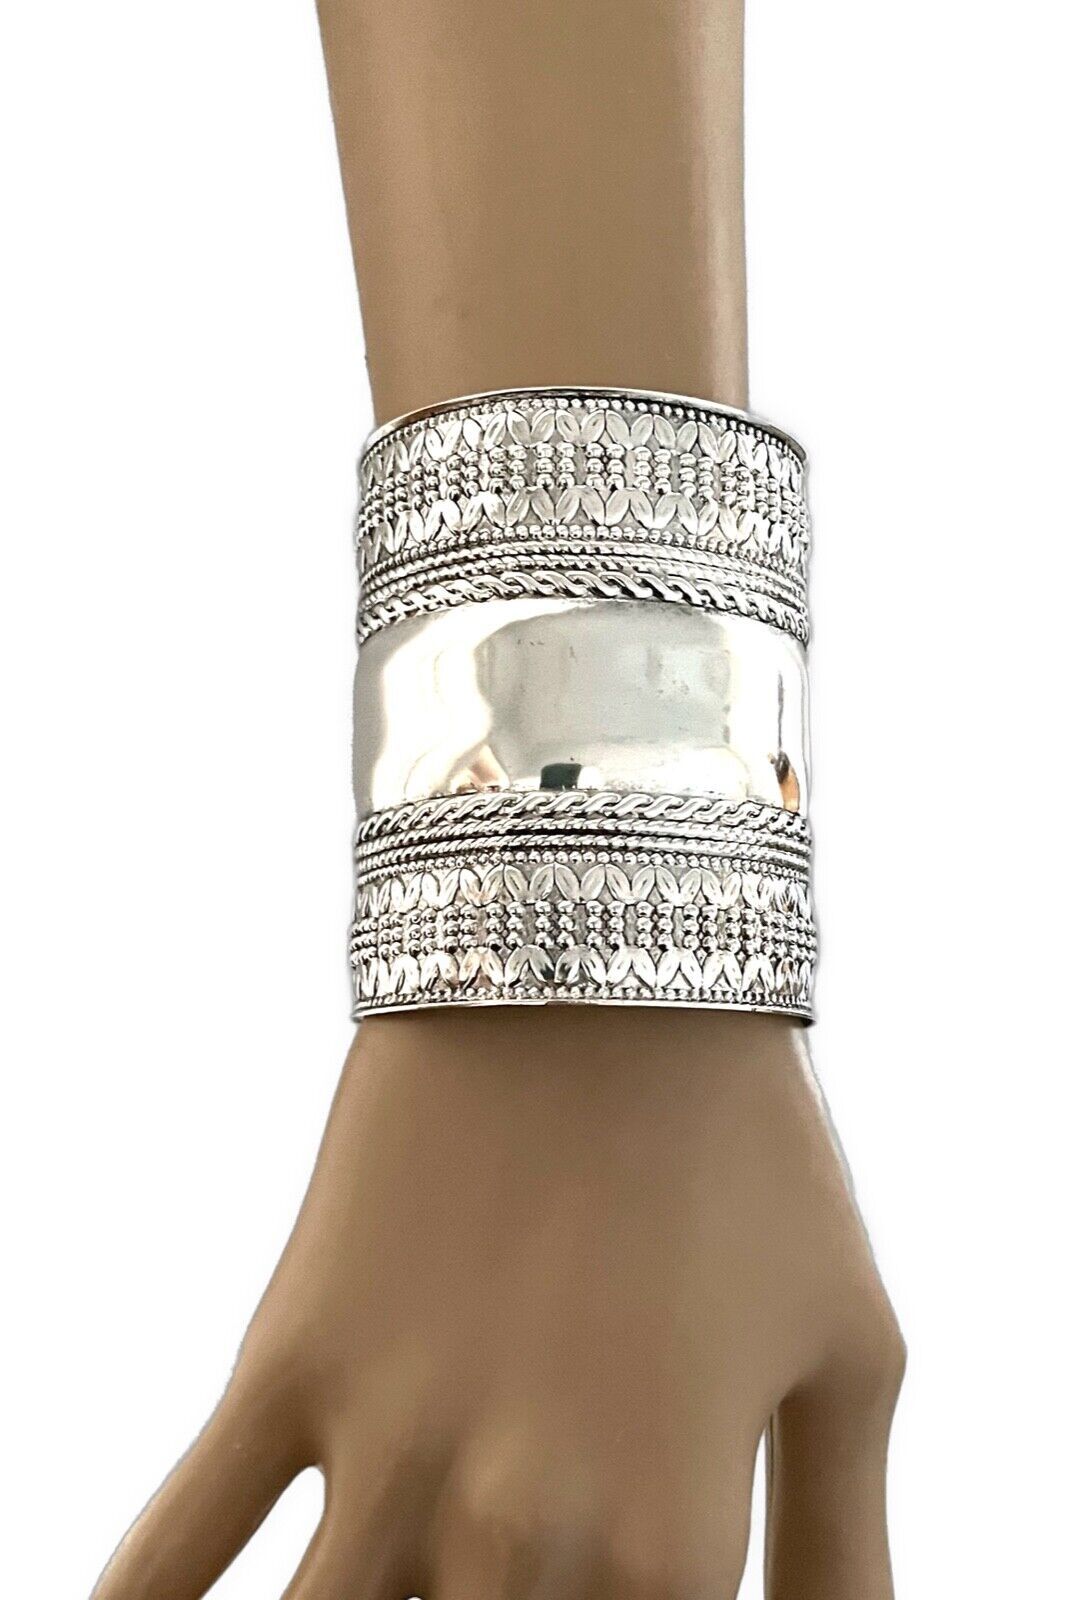 3" W Silver Tone Engraved Ethnic Tribal Inspired Casual Statement Cuff Bracelet - $14.73